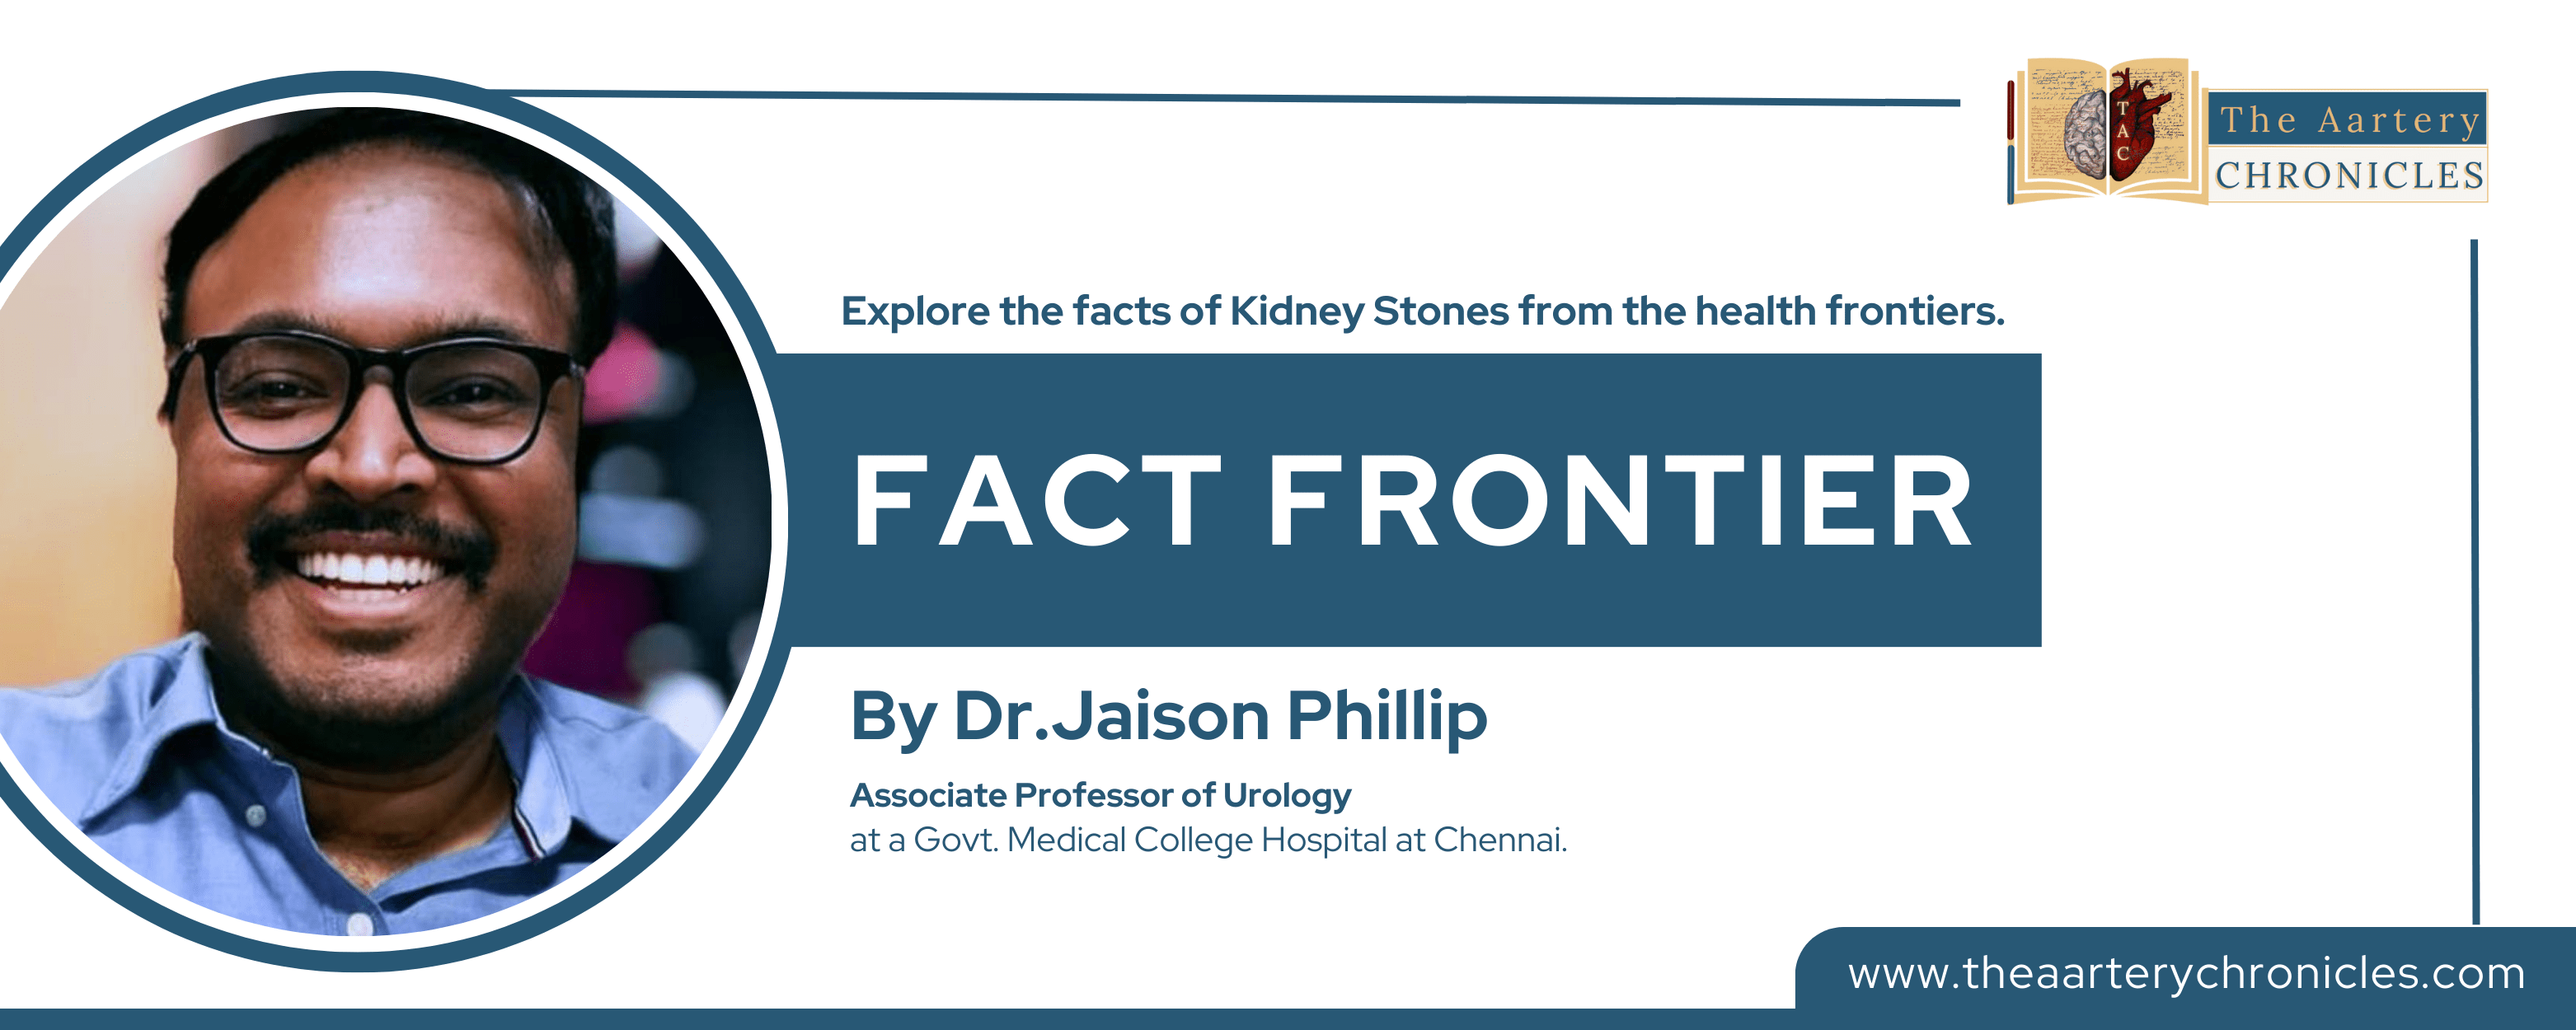 ne Facts by Dr.Jaison Phillip - The Aartery Chronicles (TAC)